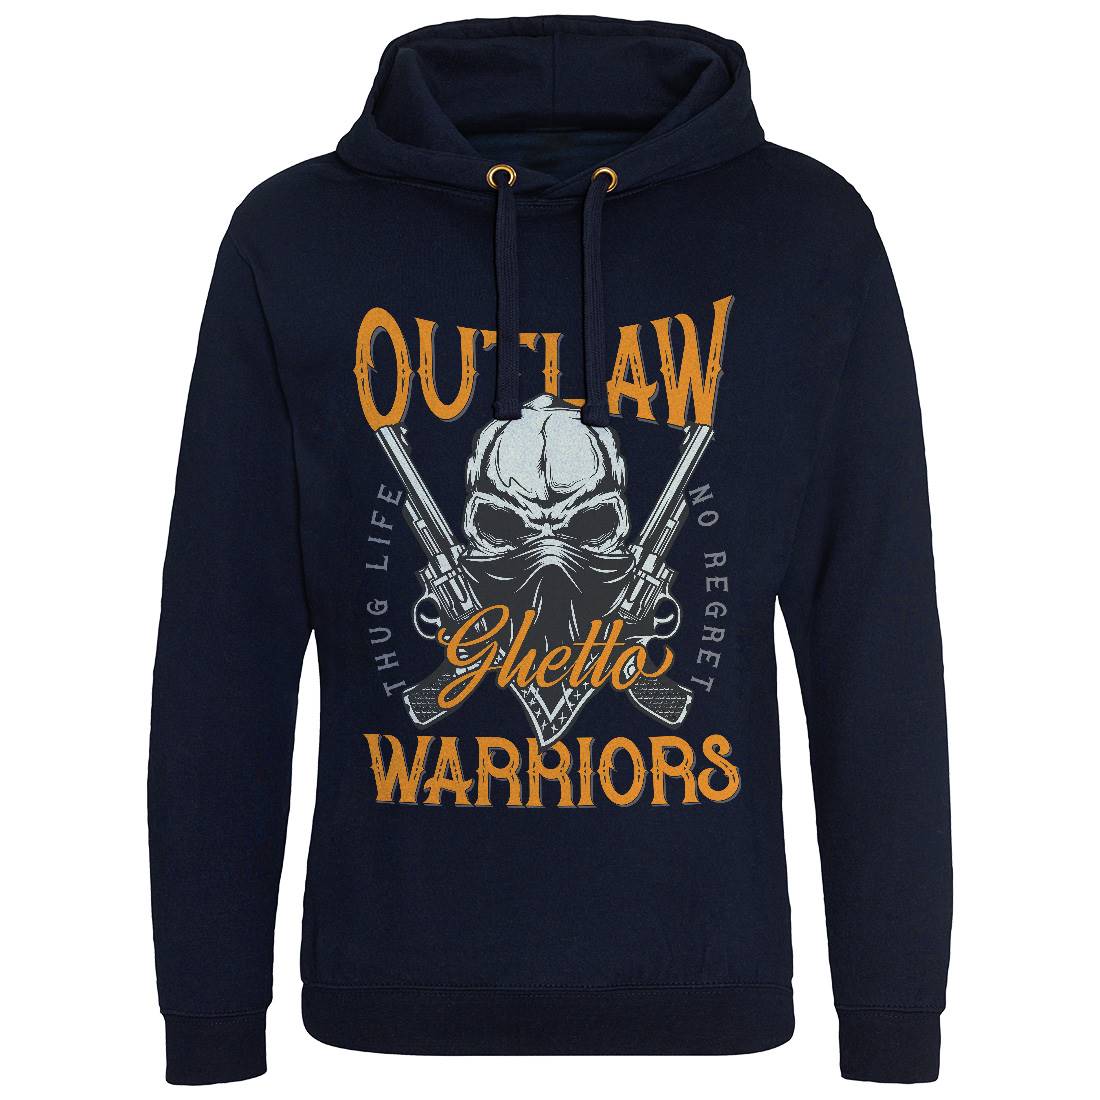 Outlaw Warriors Mens Hoodie Without Pocket Retro D959